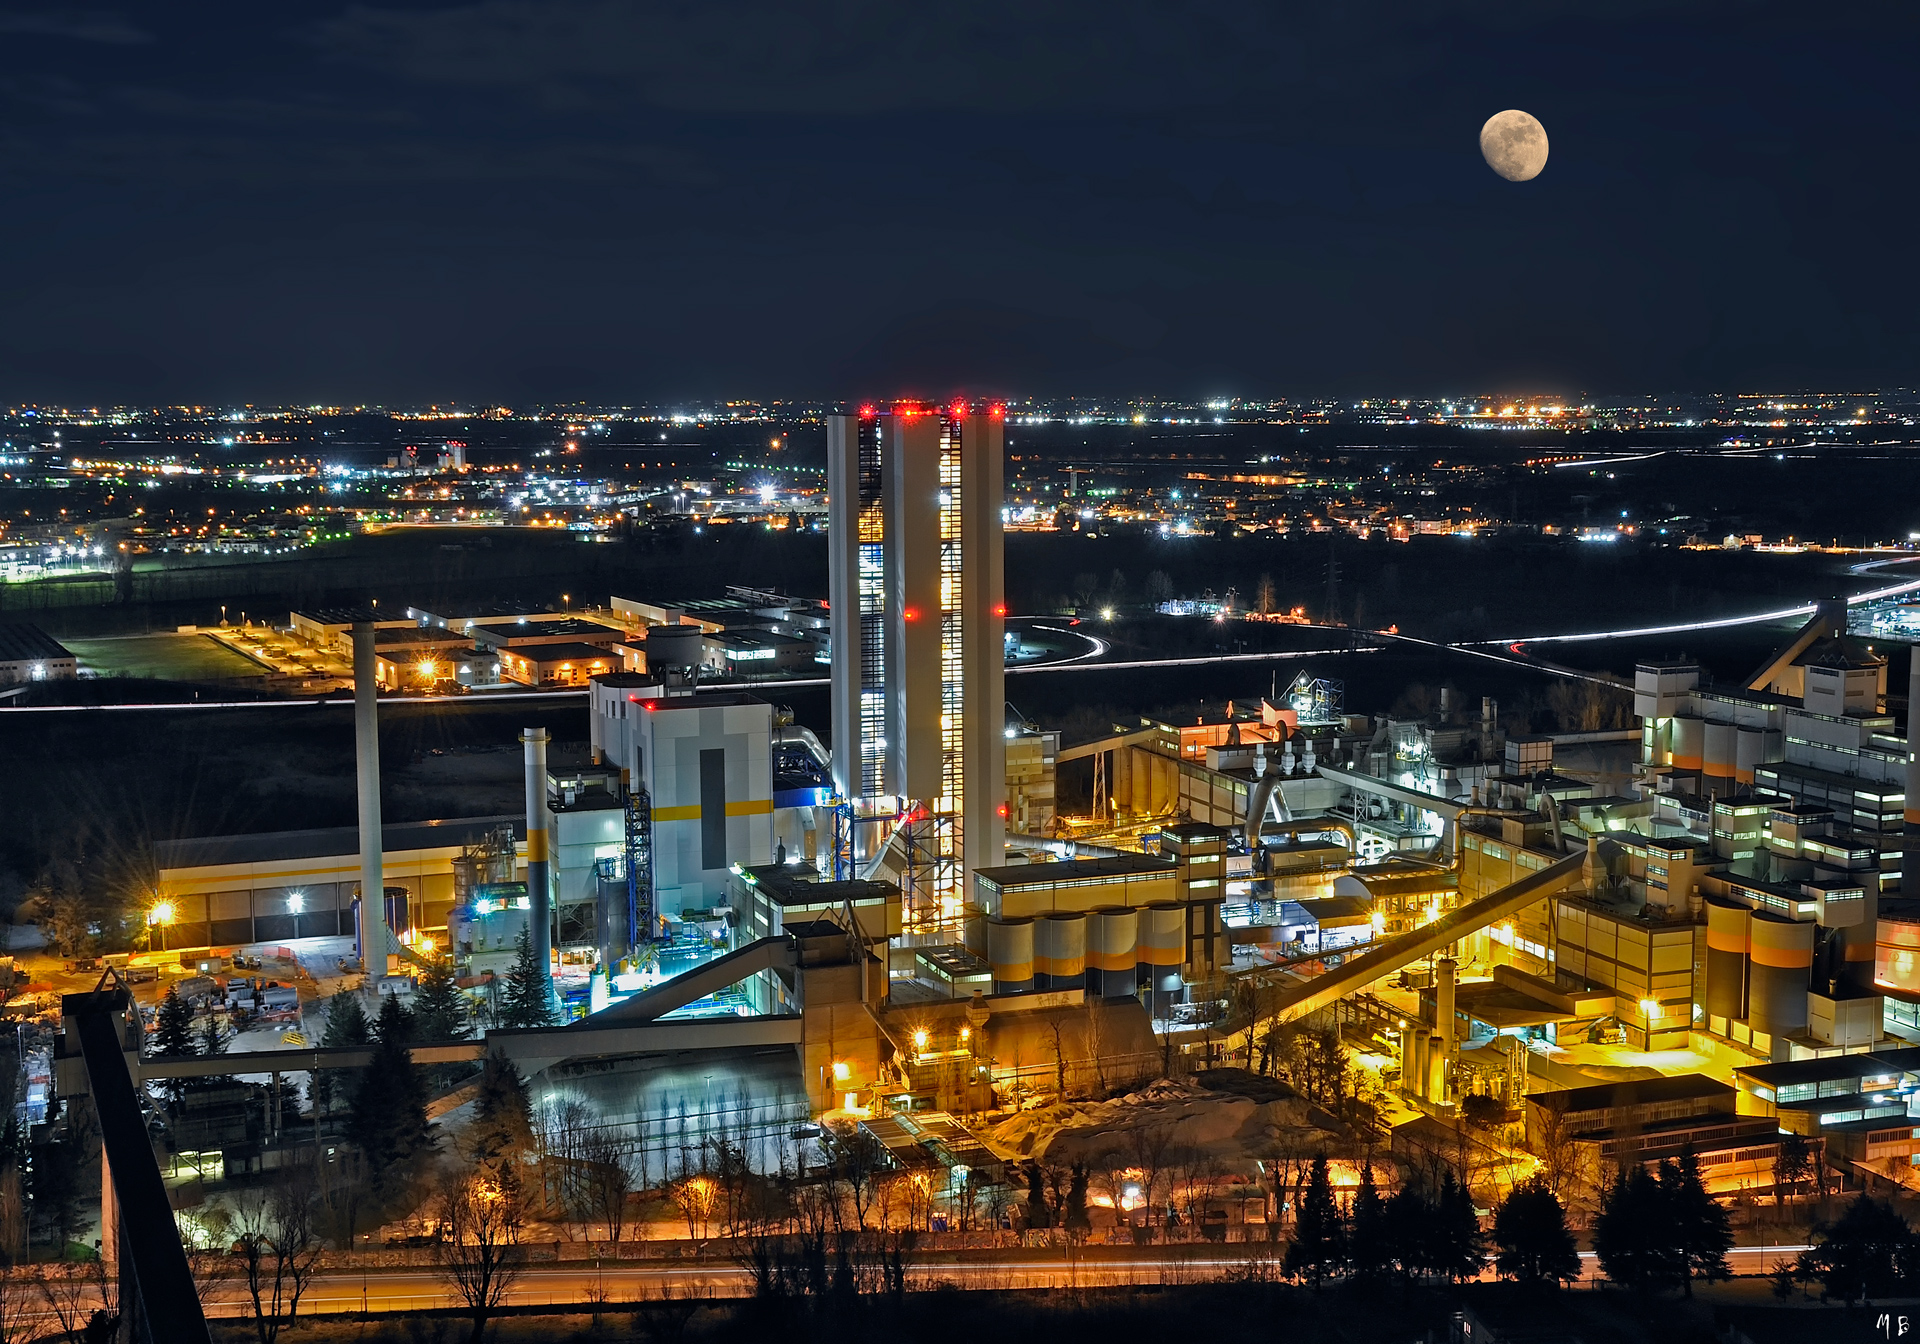 Aerial view of a cement plant at night